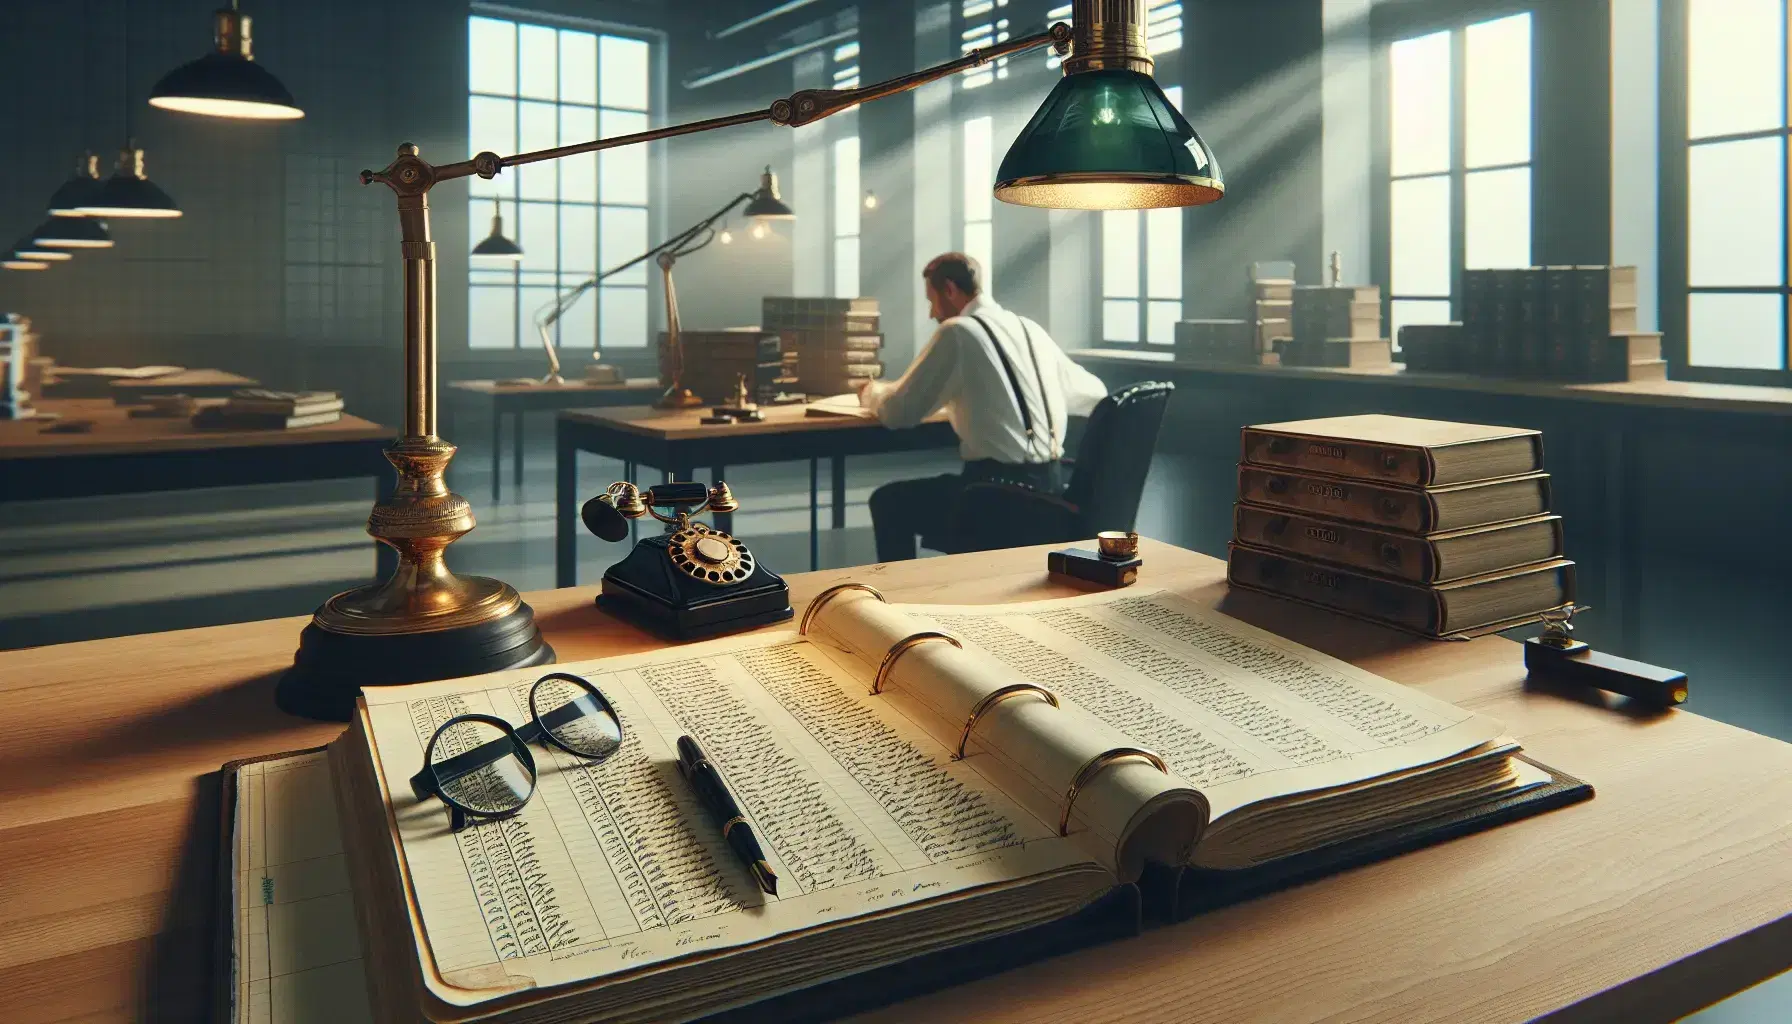 Modern office setting with a wooden desk featuring an open ledger book, vintage brass lamp, eyeglasses, and fountain pen, with a person working in the background.